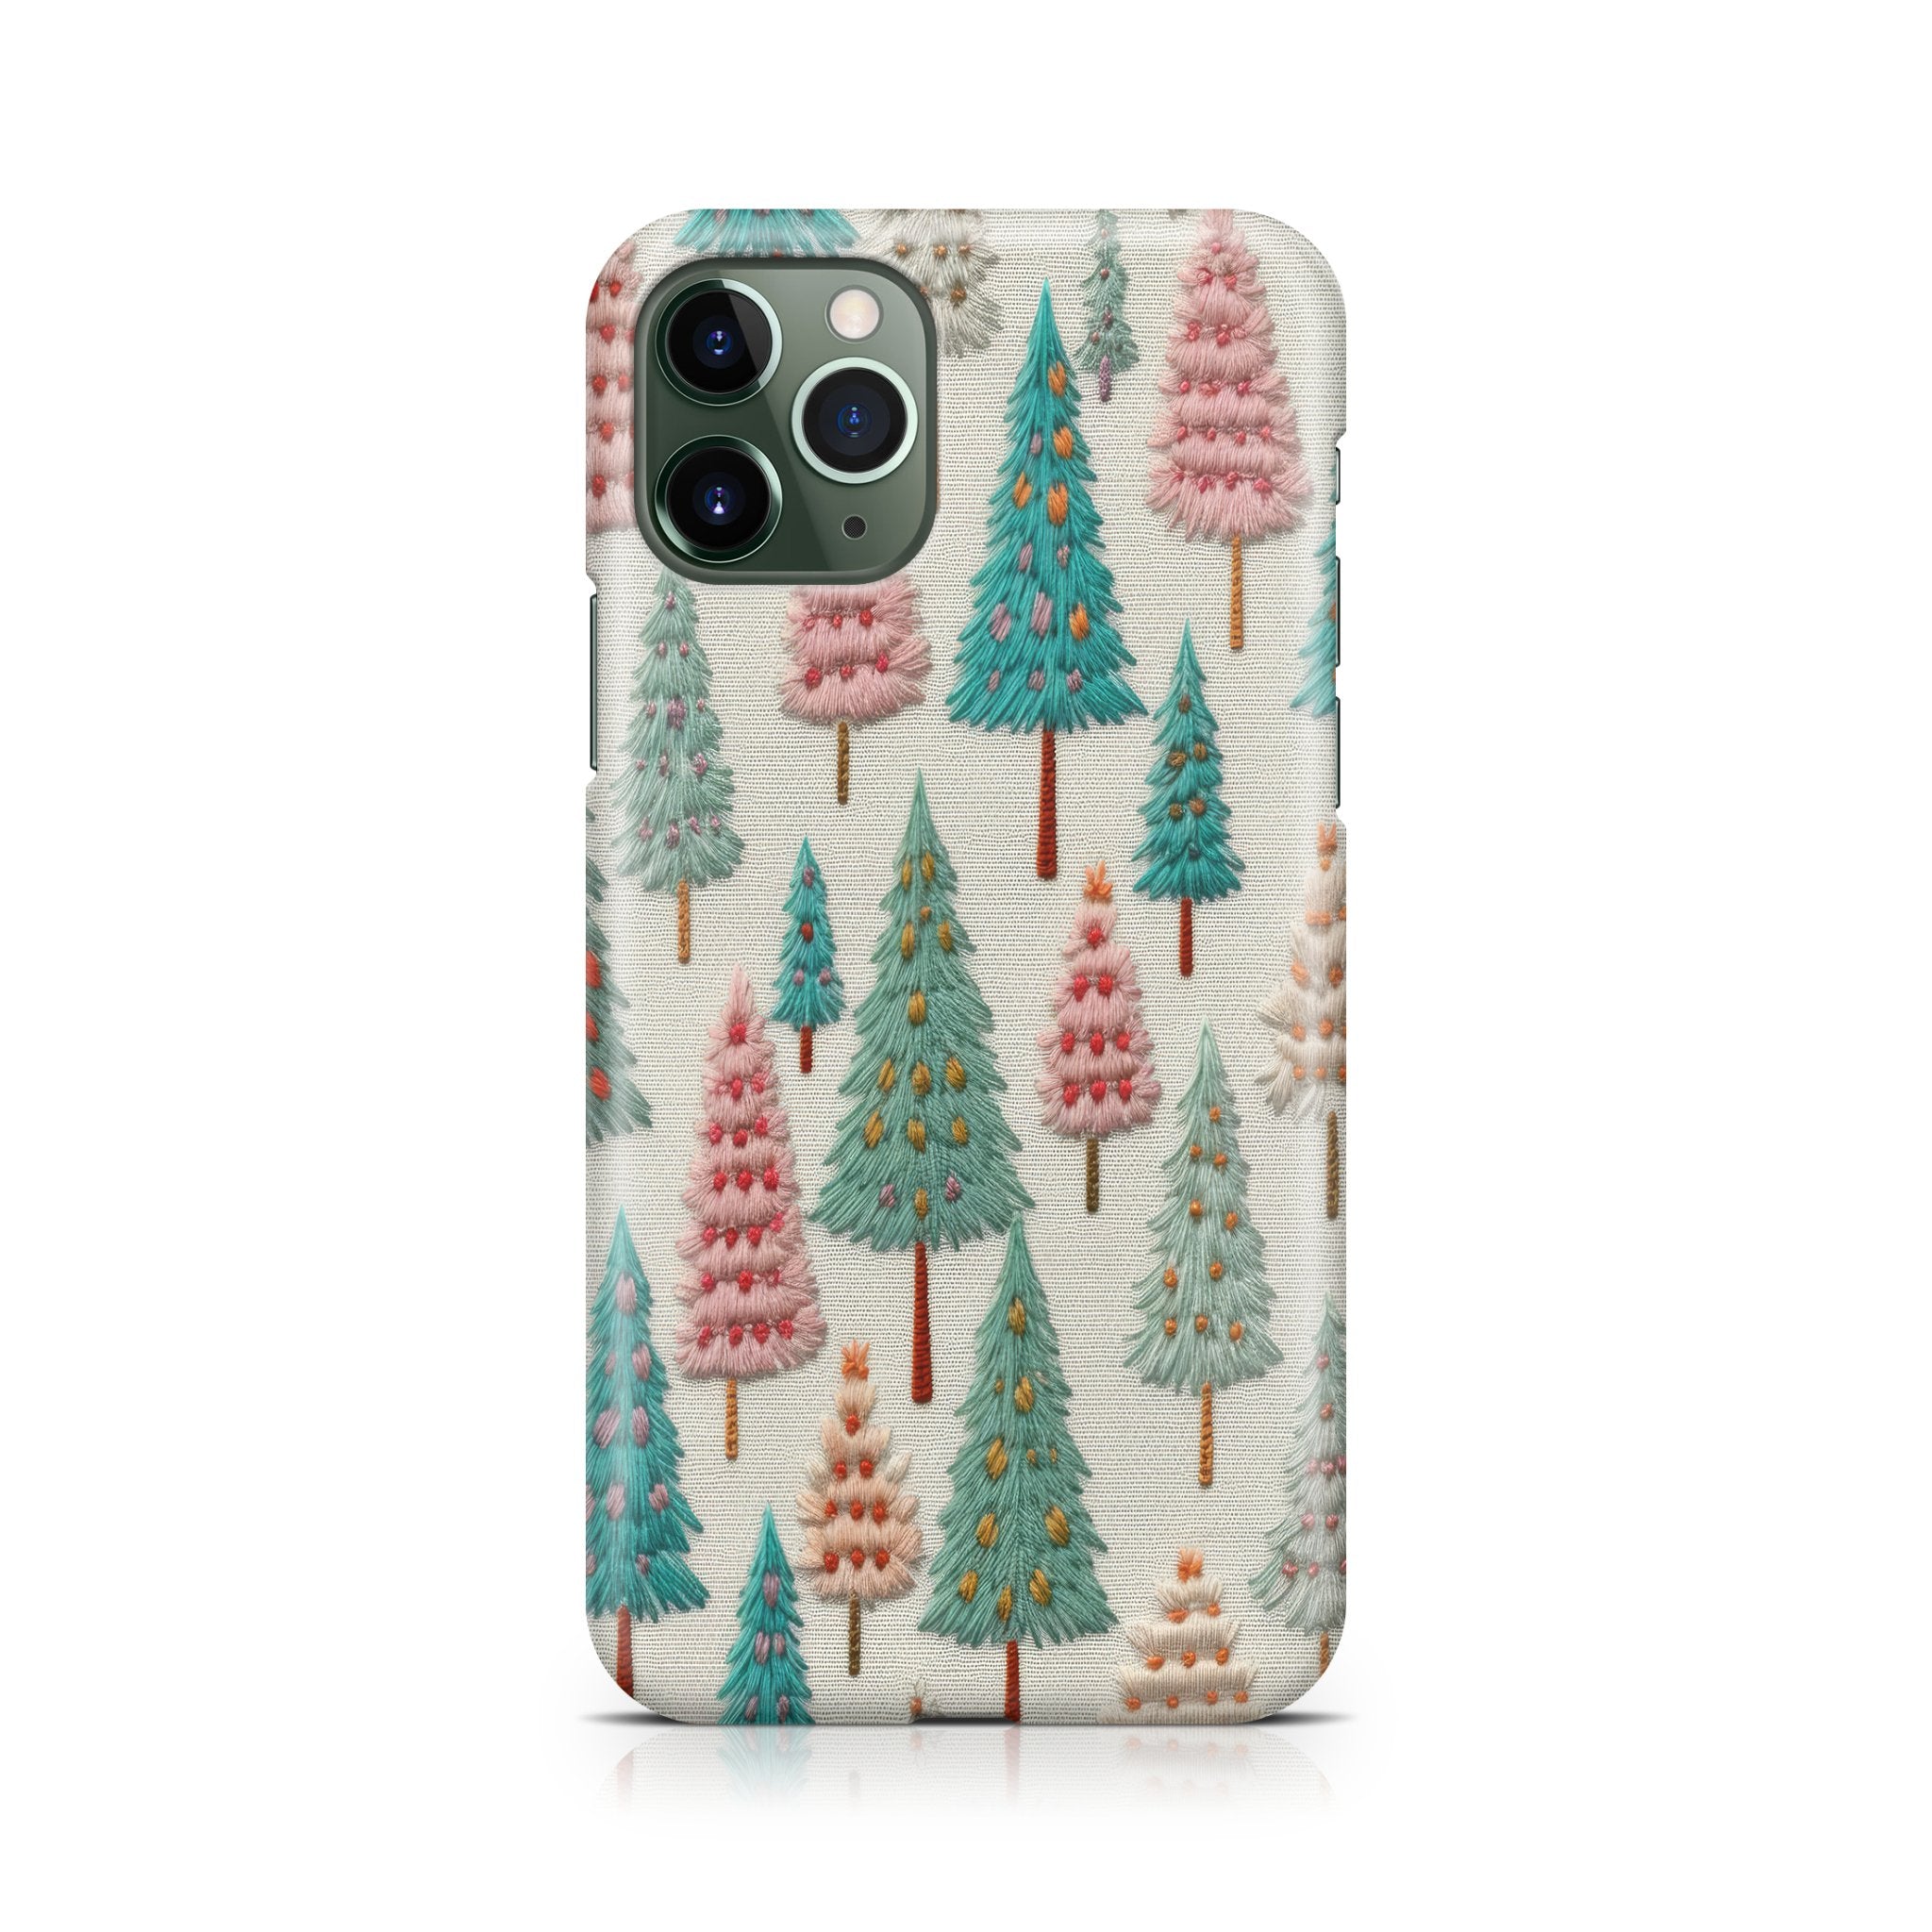 Christmas Trees - iPhone phone case designs by CaseSwagger